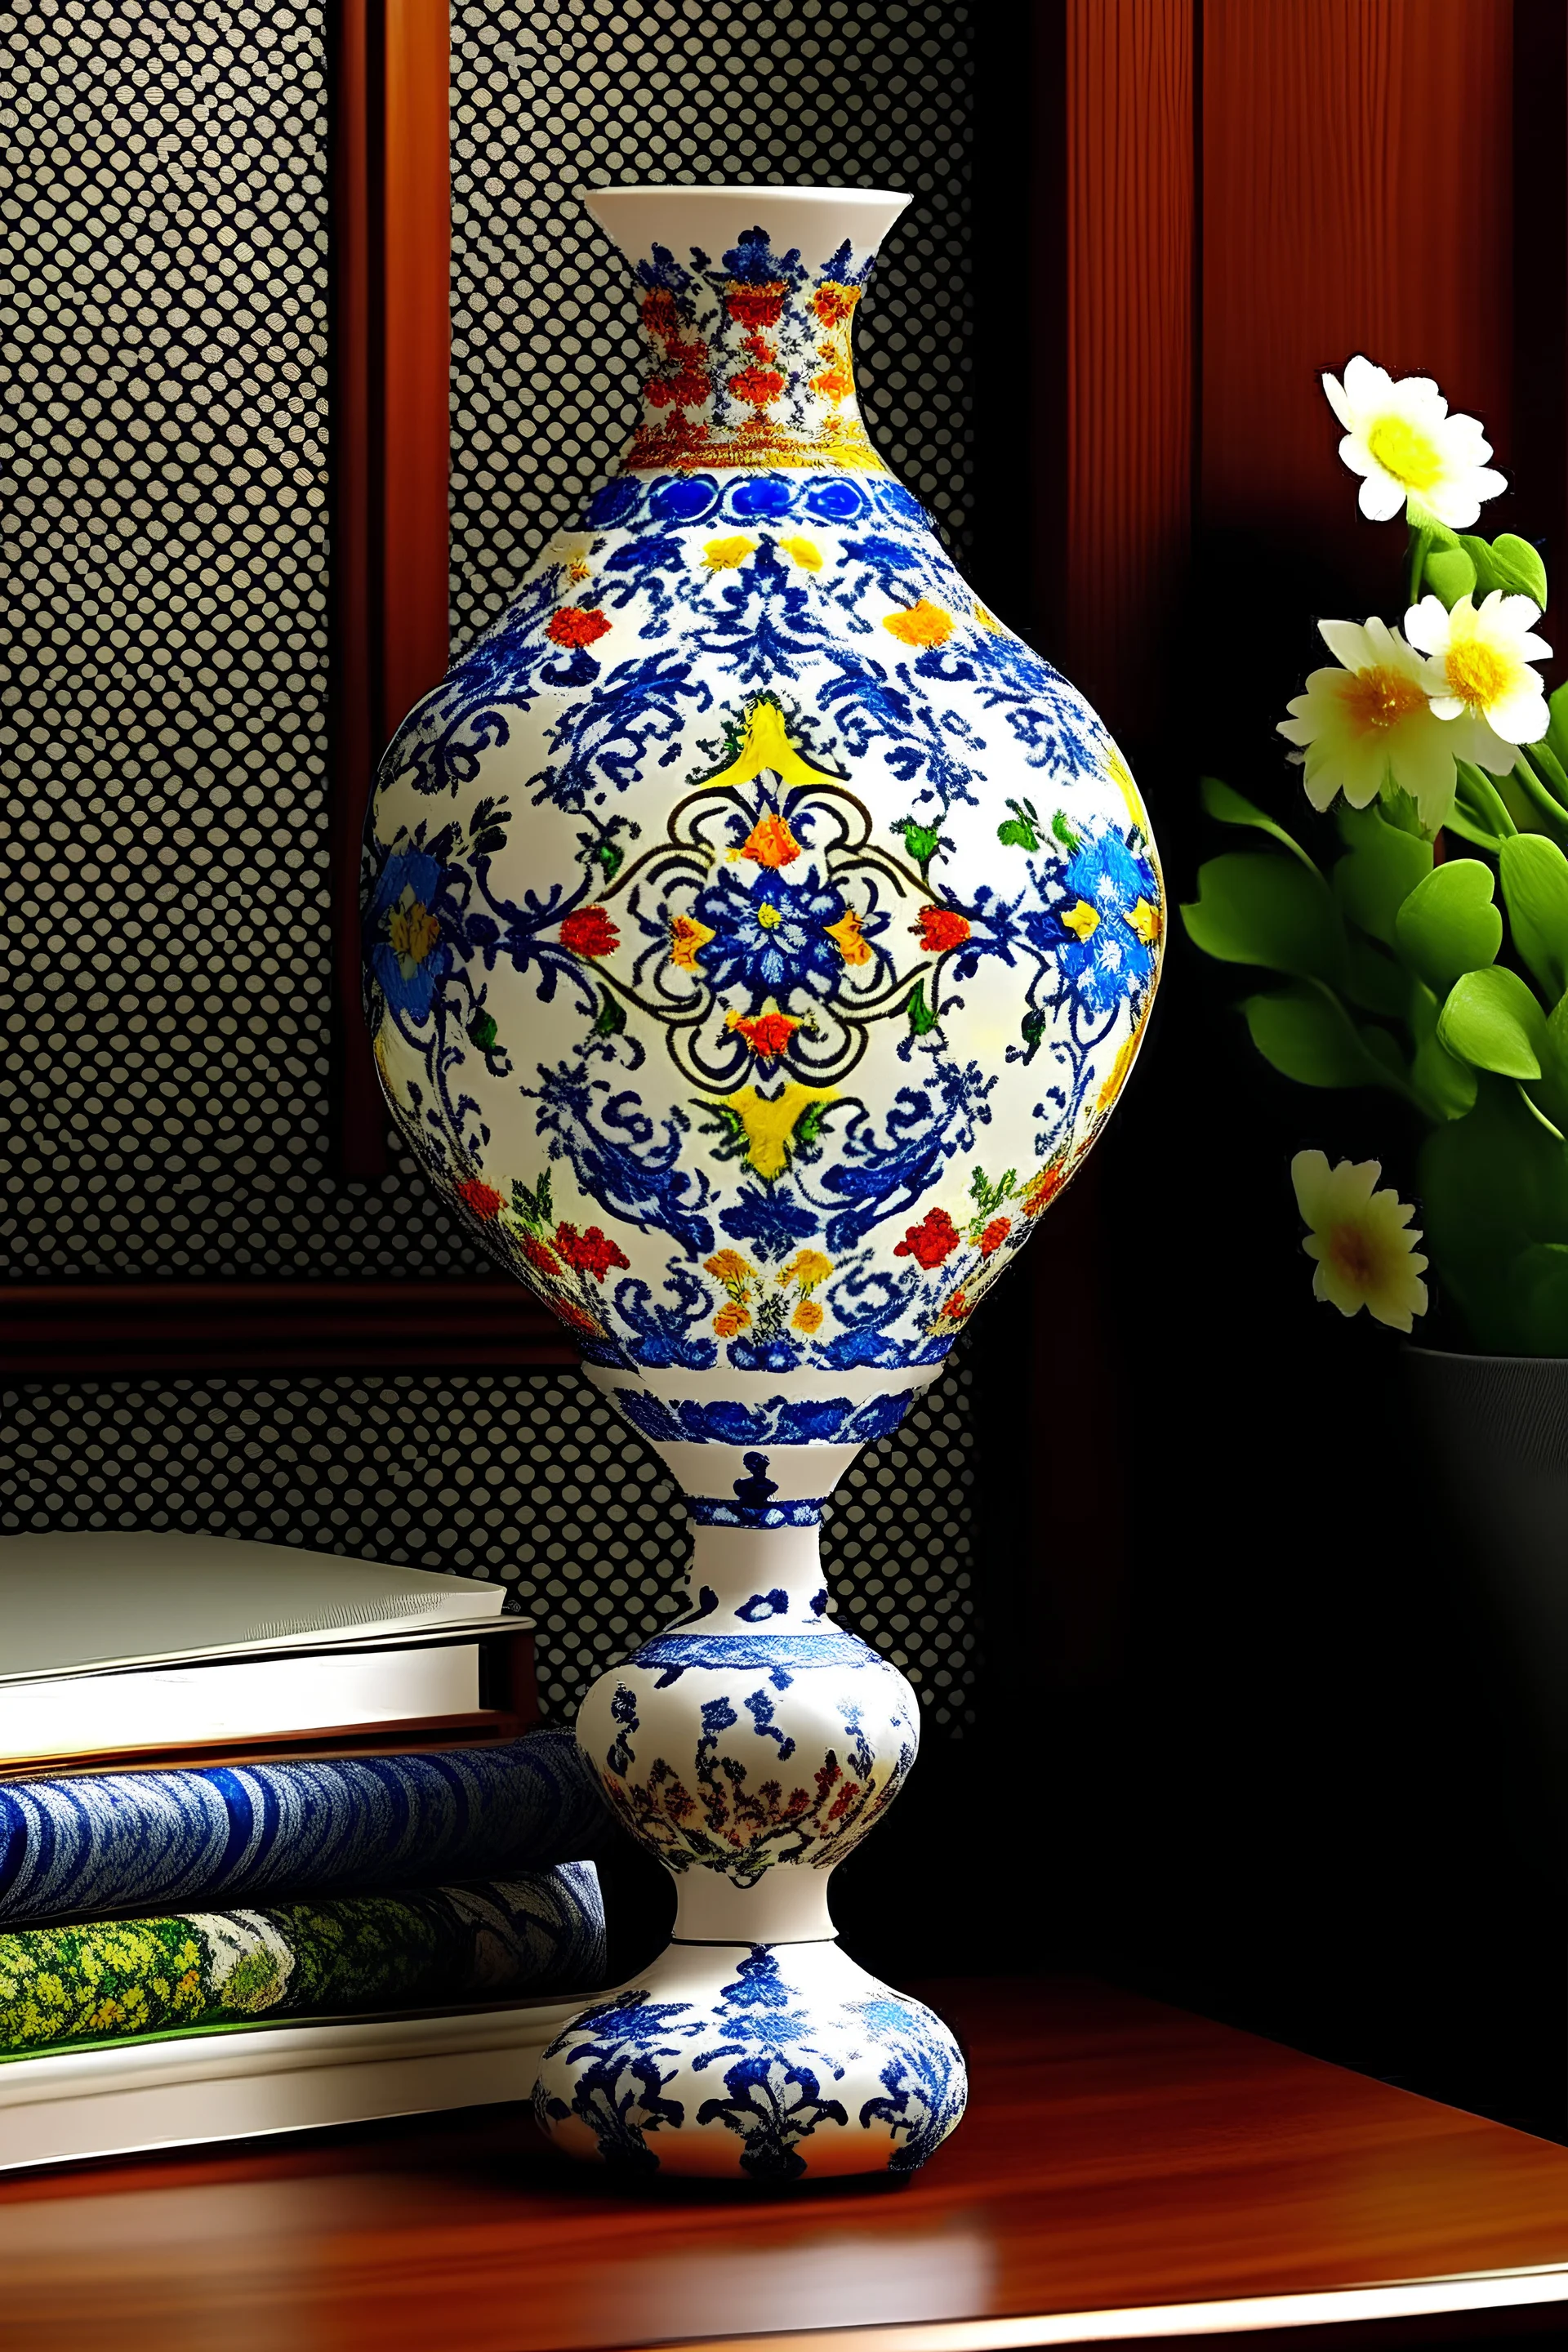 Portuguese tiles pattern ceramic vase with a lamp